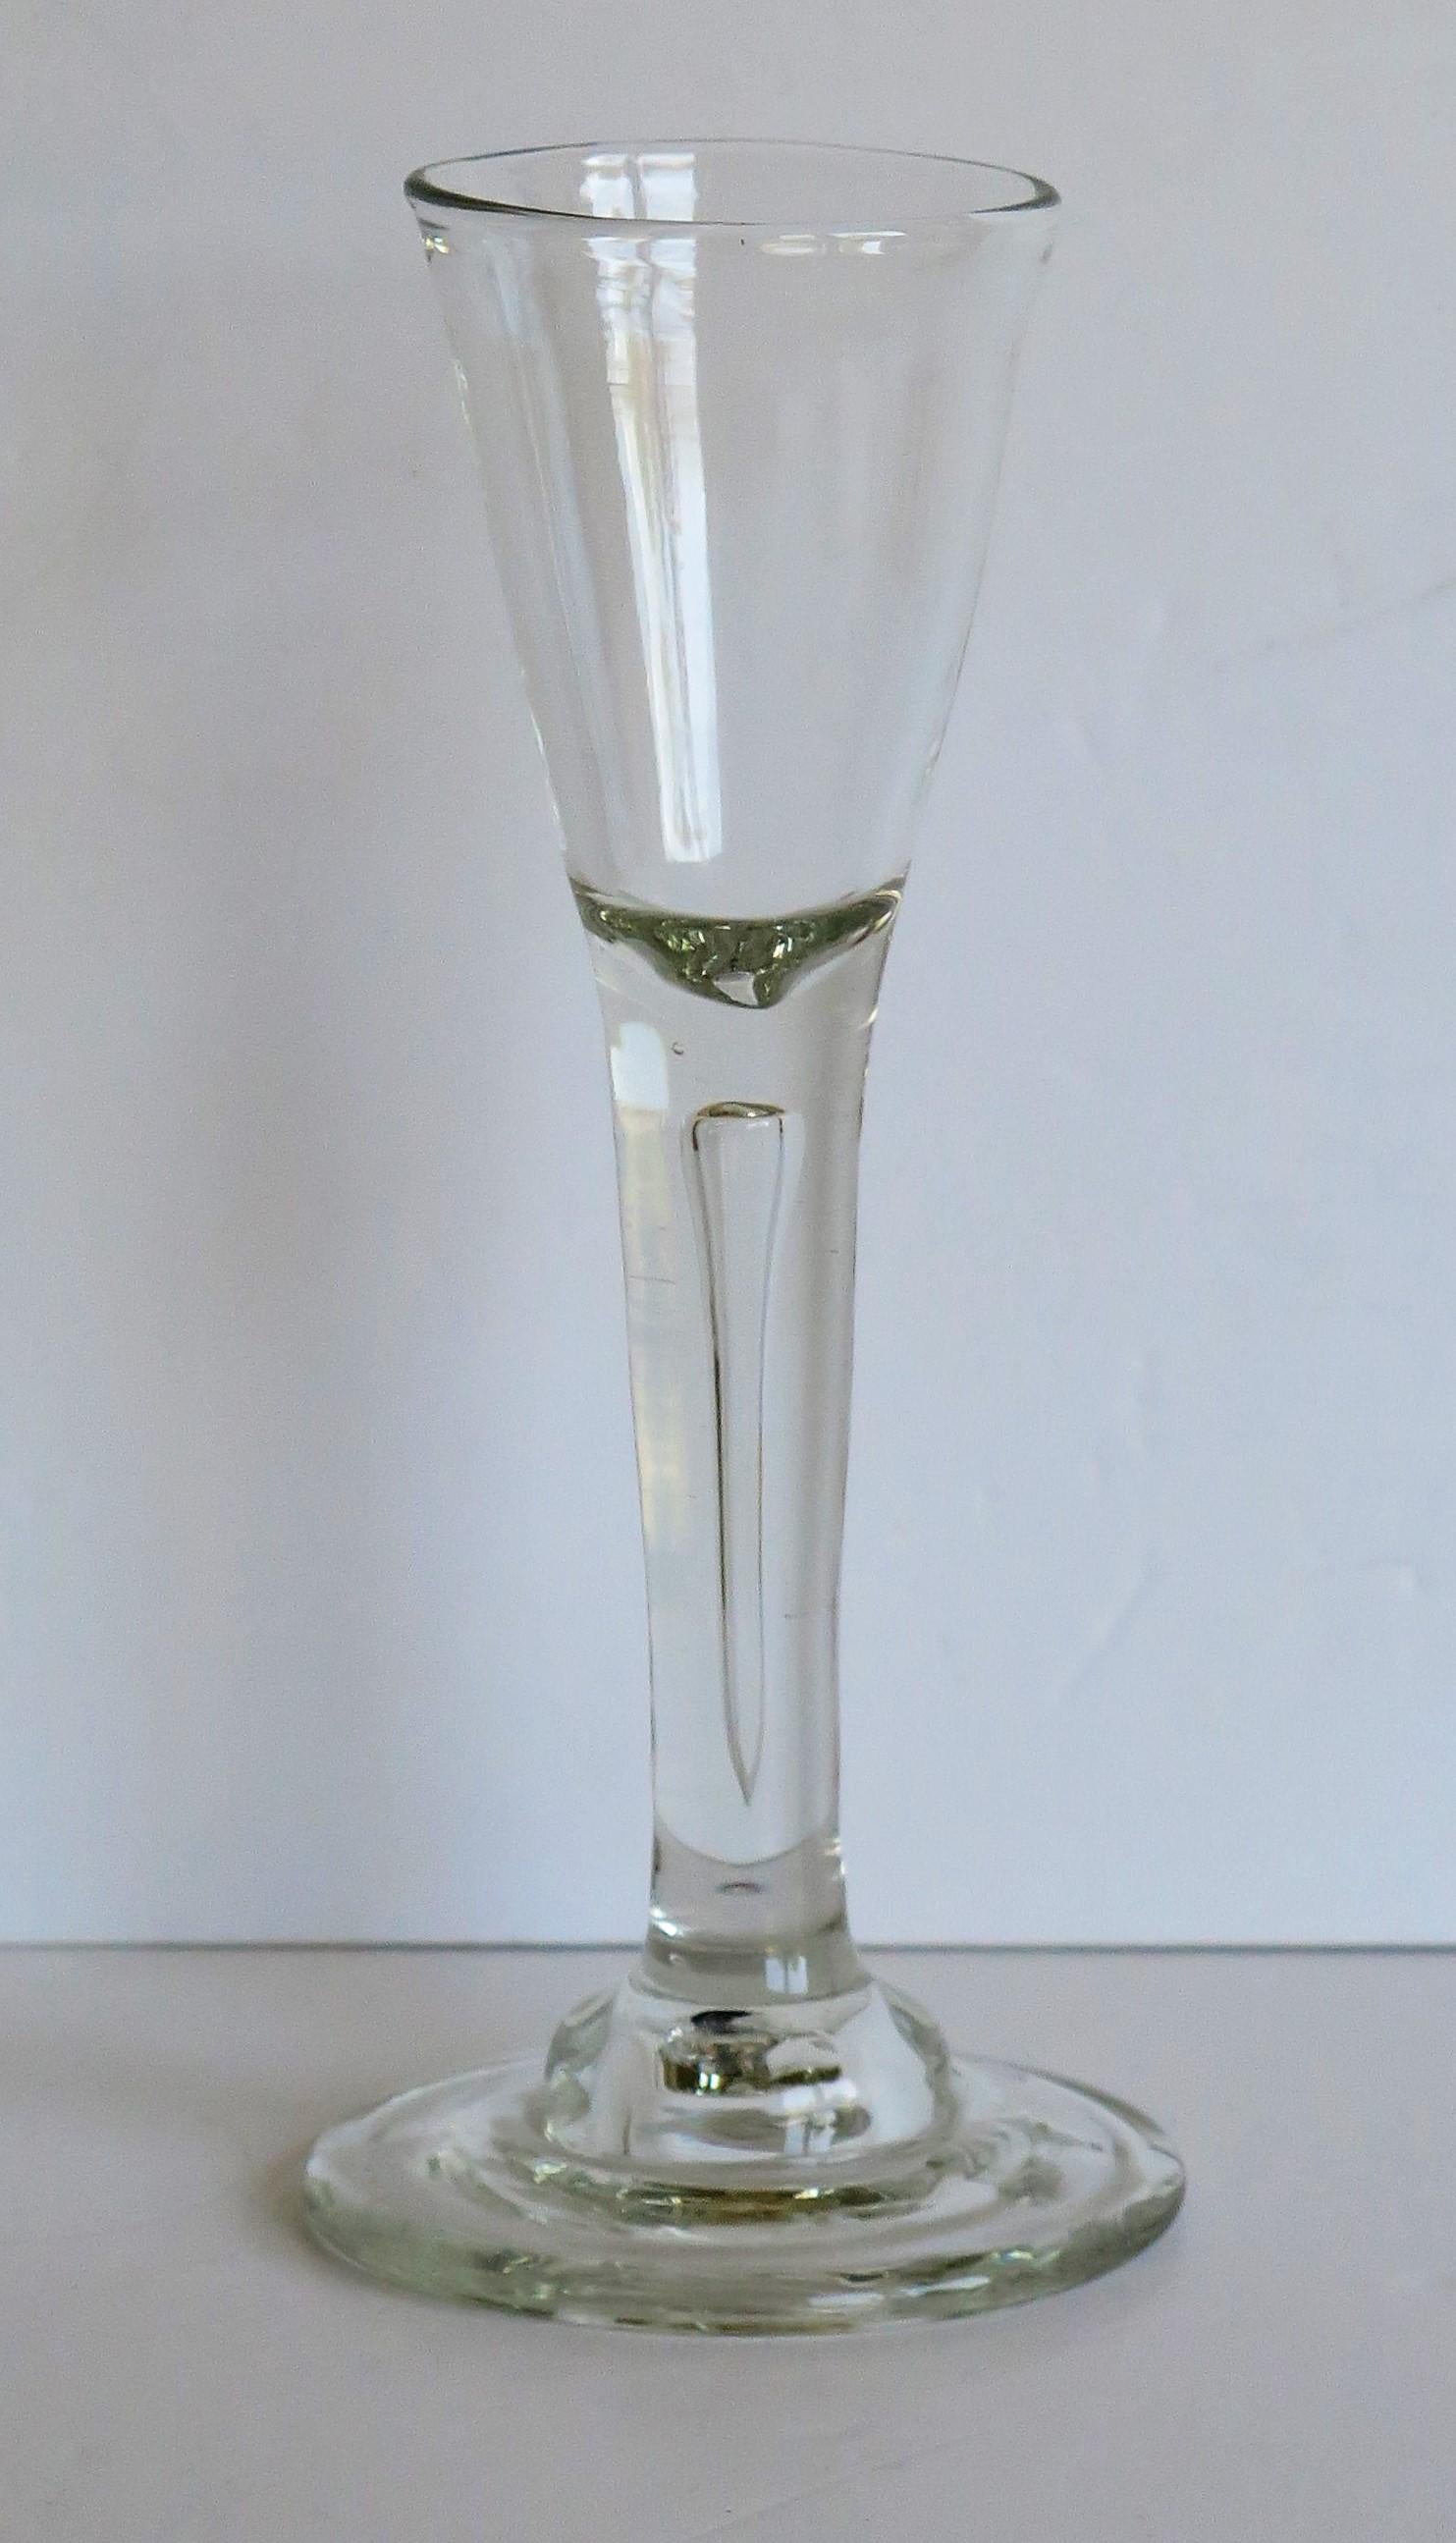 glass with a foot and stem